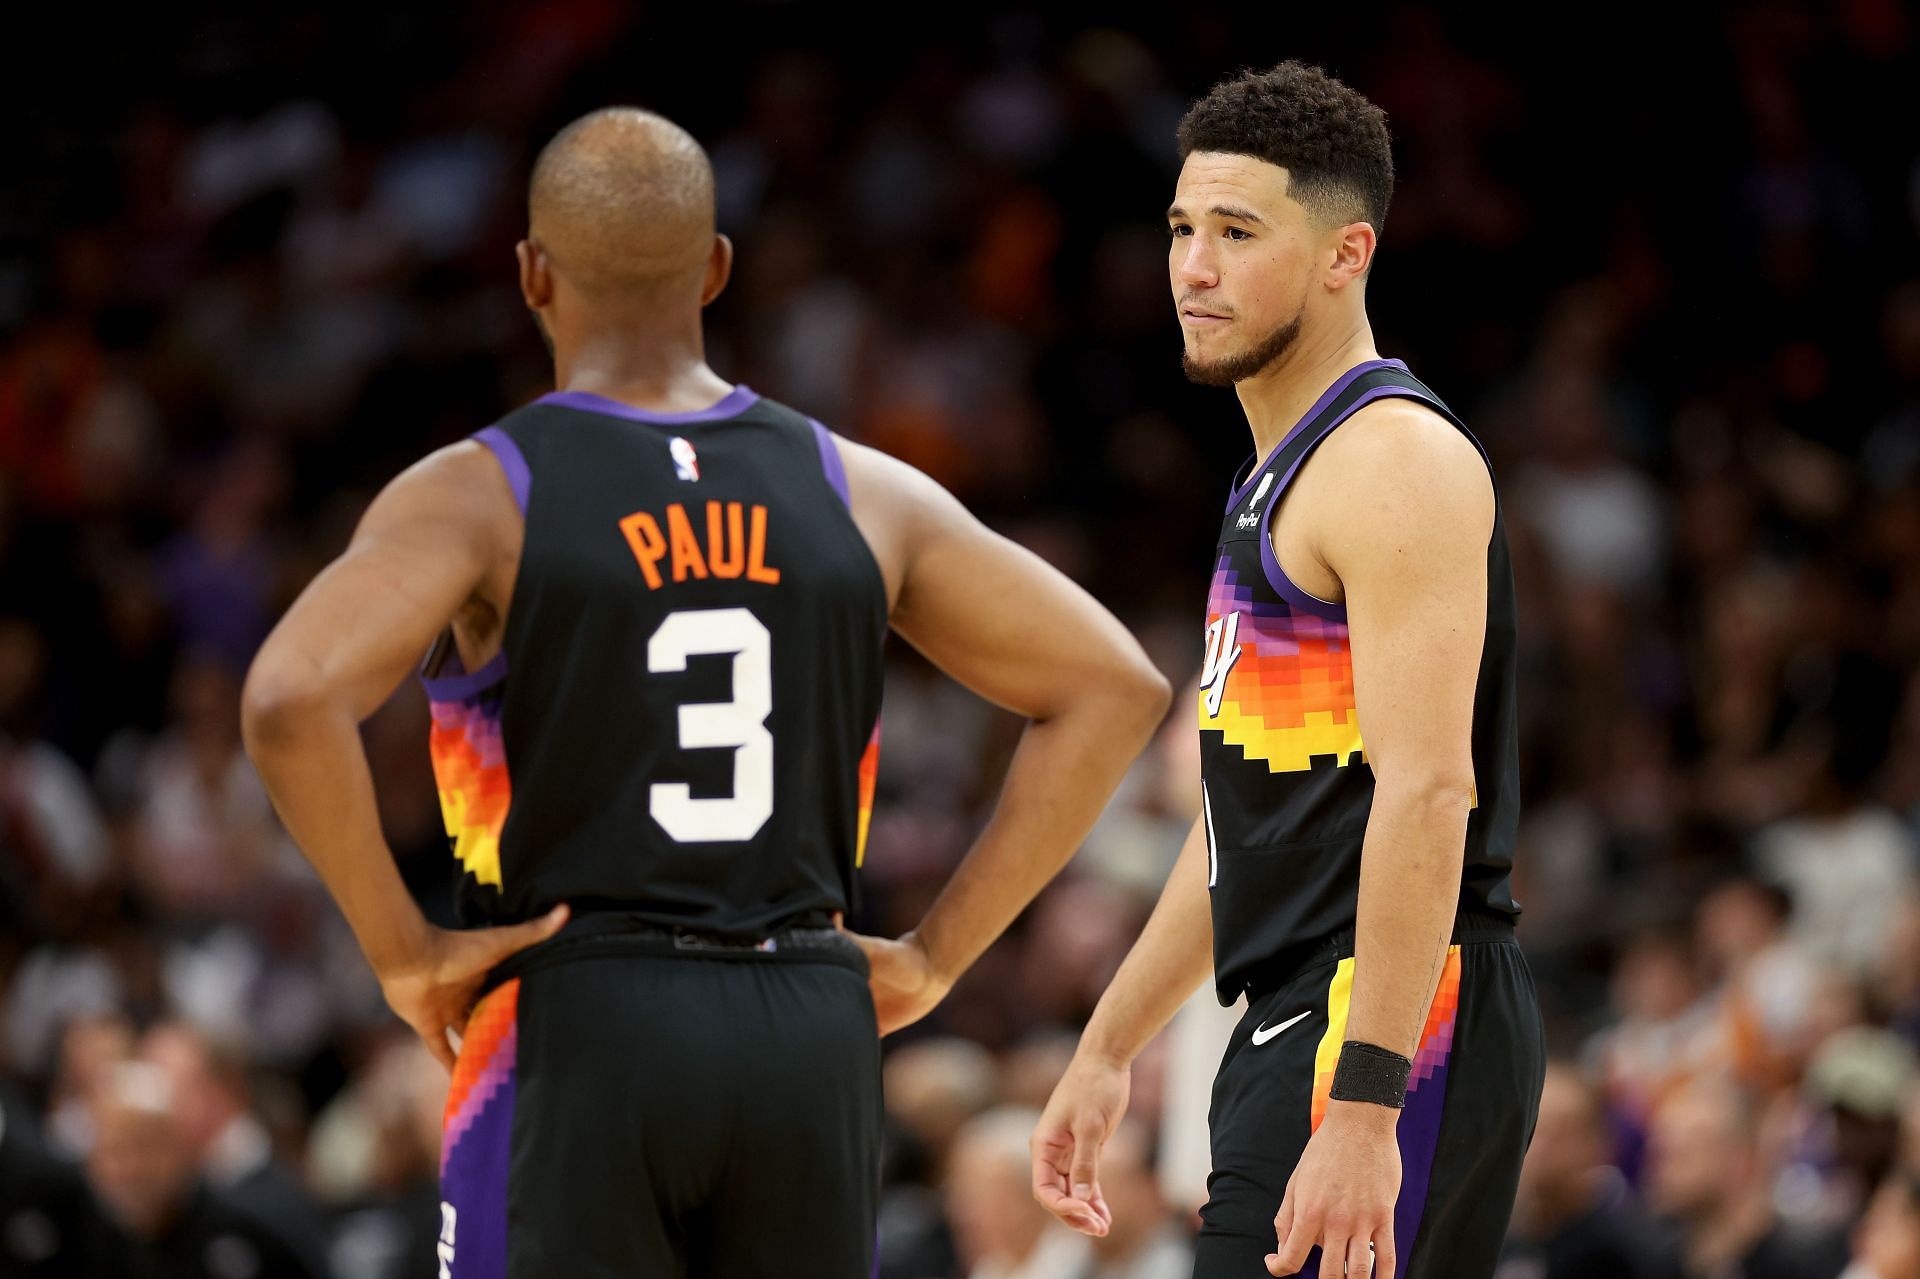 Chris Paul discusses the game with Devin Booker.